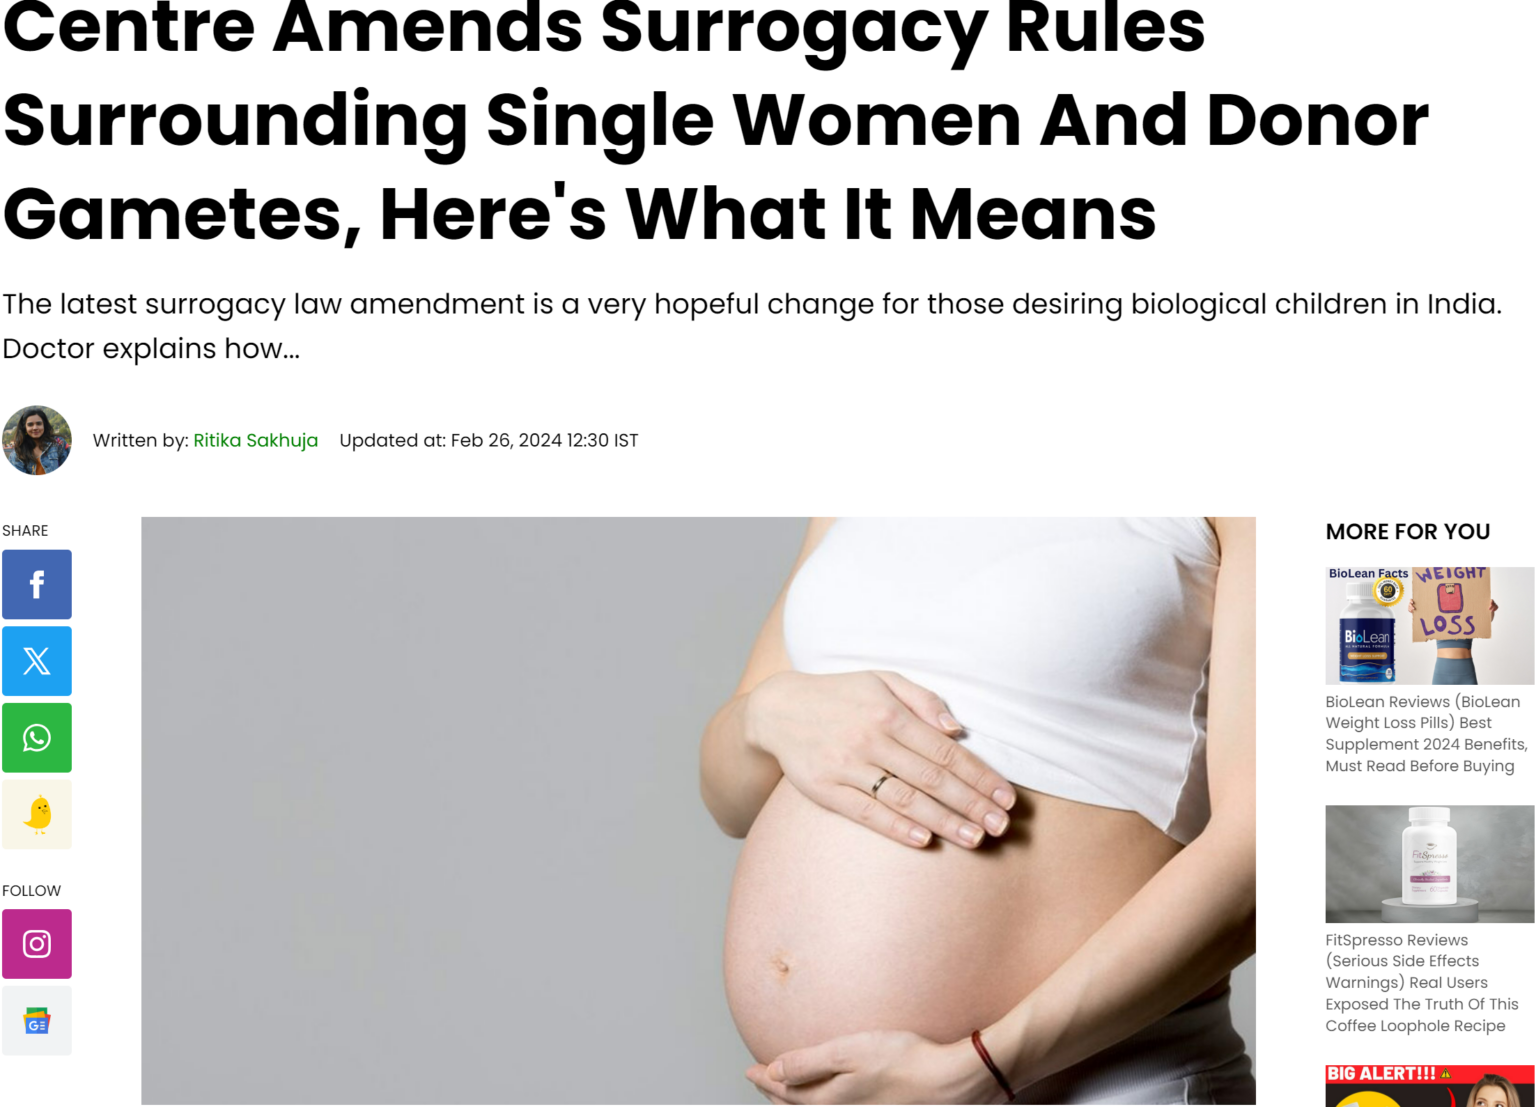 Centre Amends Surrogacy Rules Surrounding Single Women And Donor Gametes, Here's What It Means